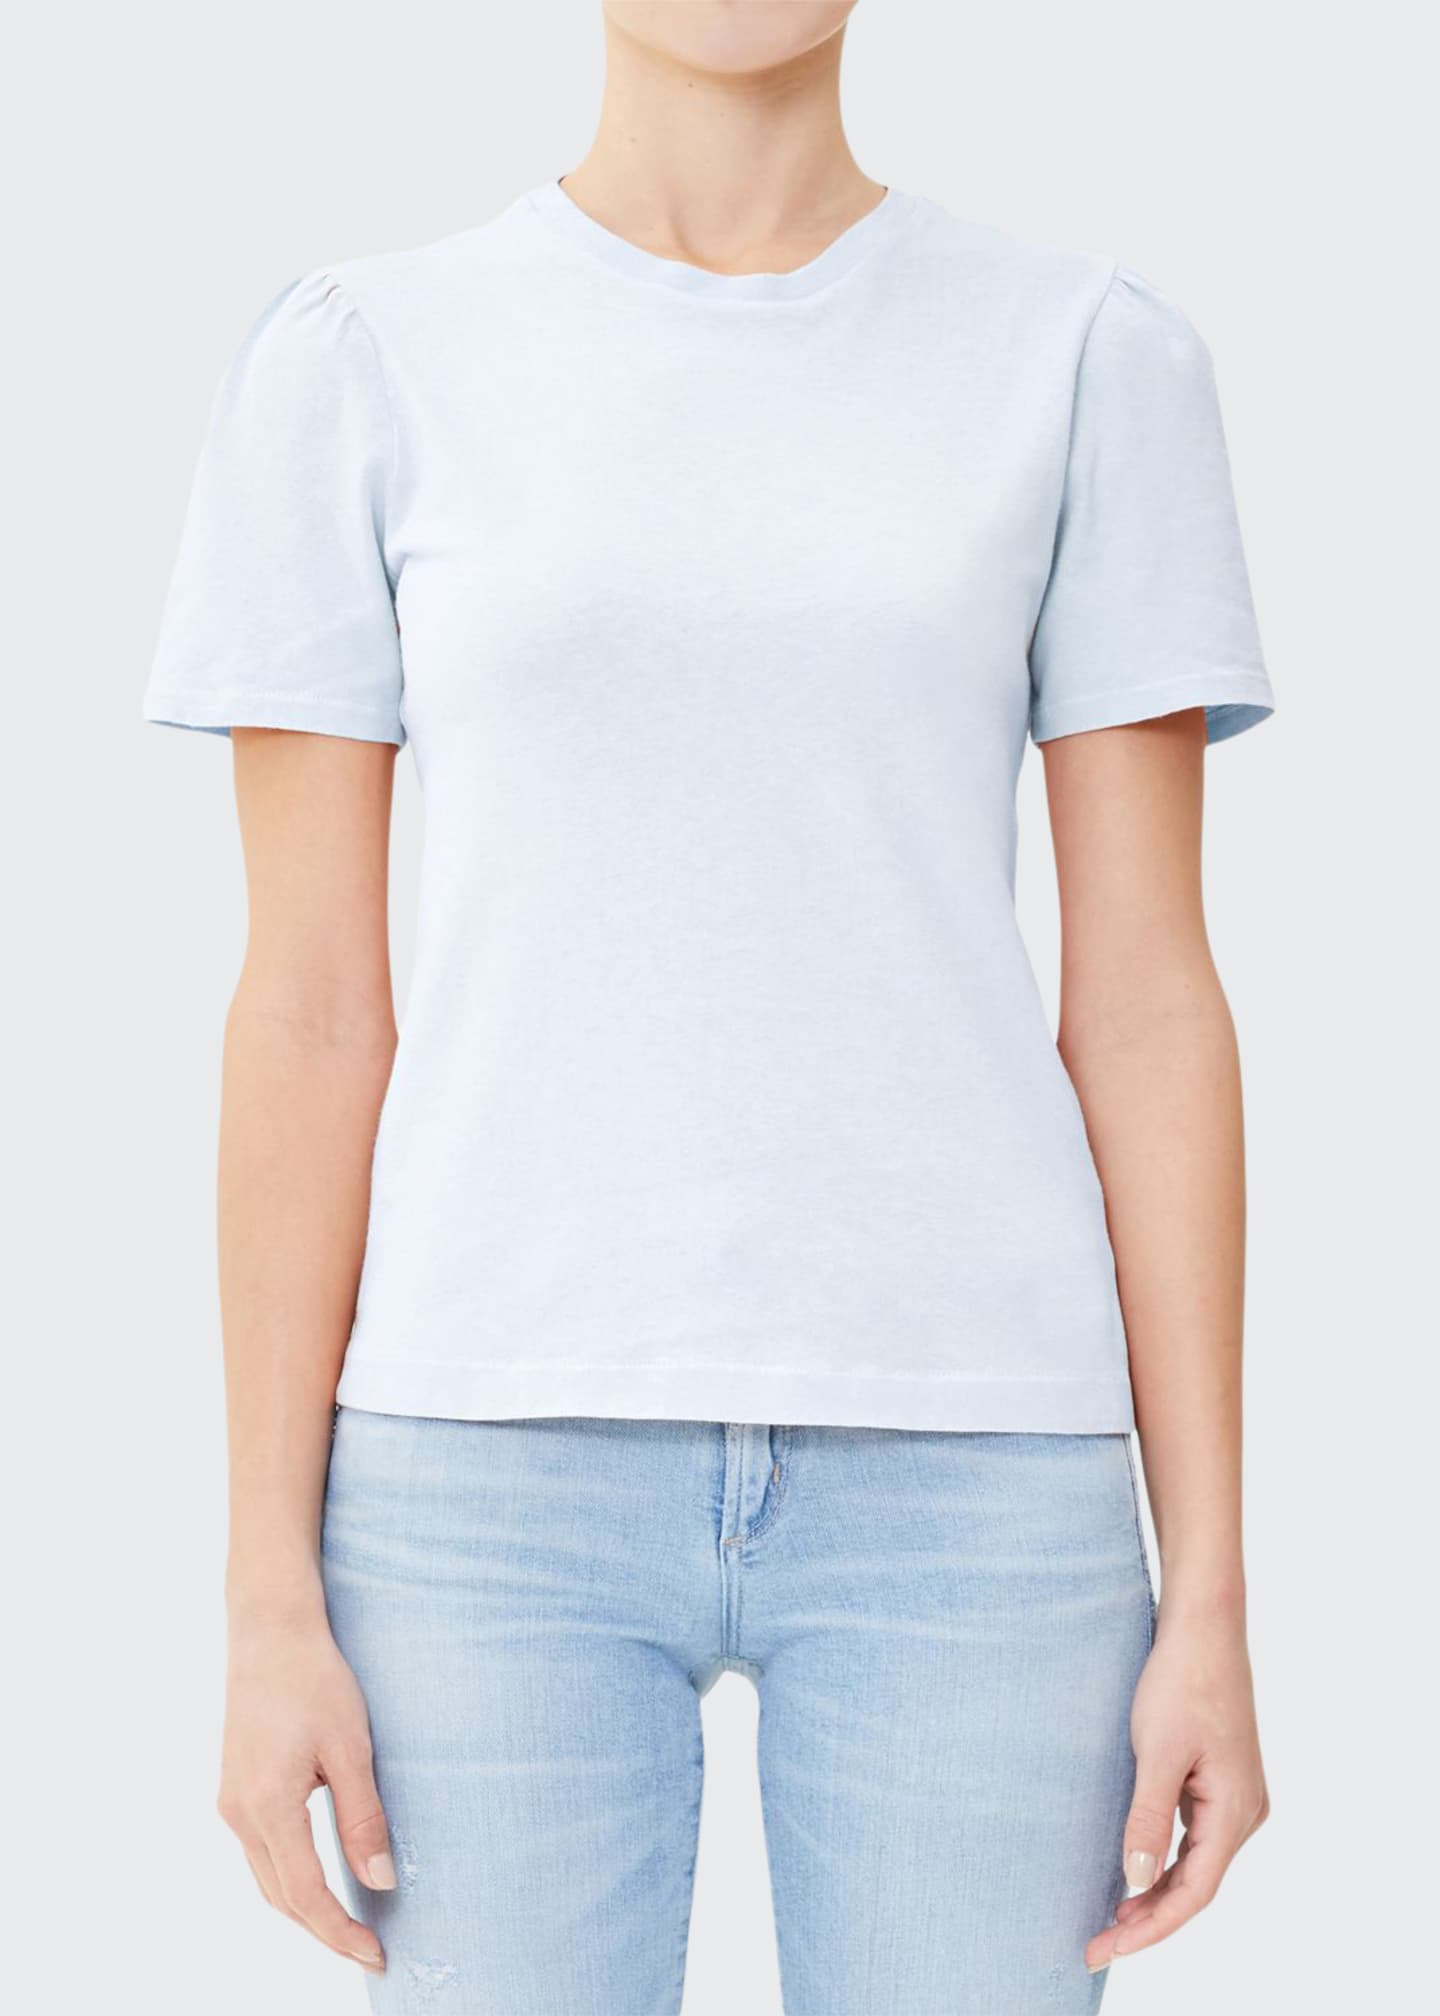 citizens of humanity hannah puff sleeve tee